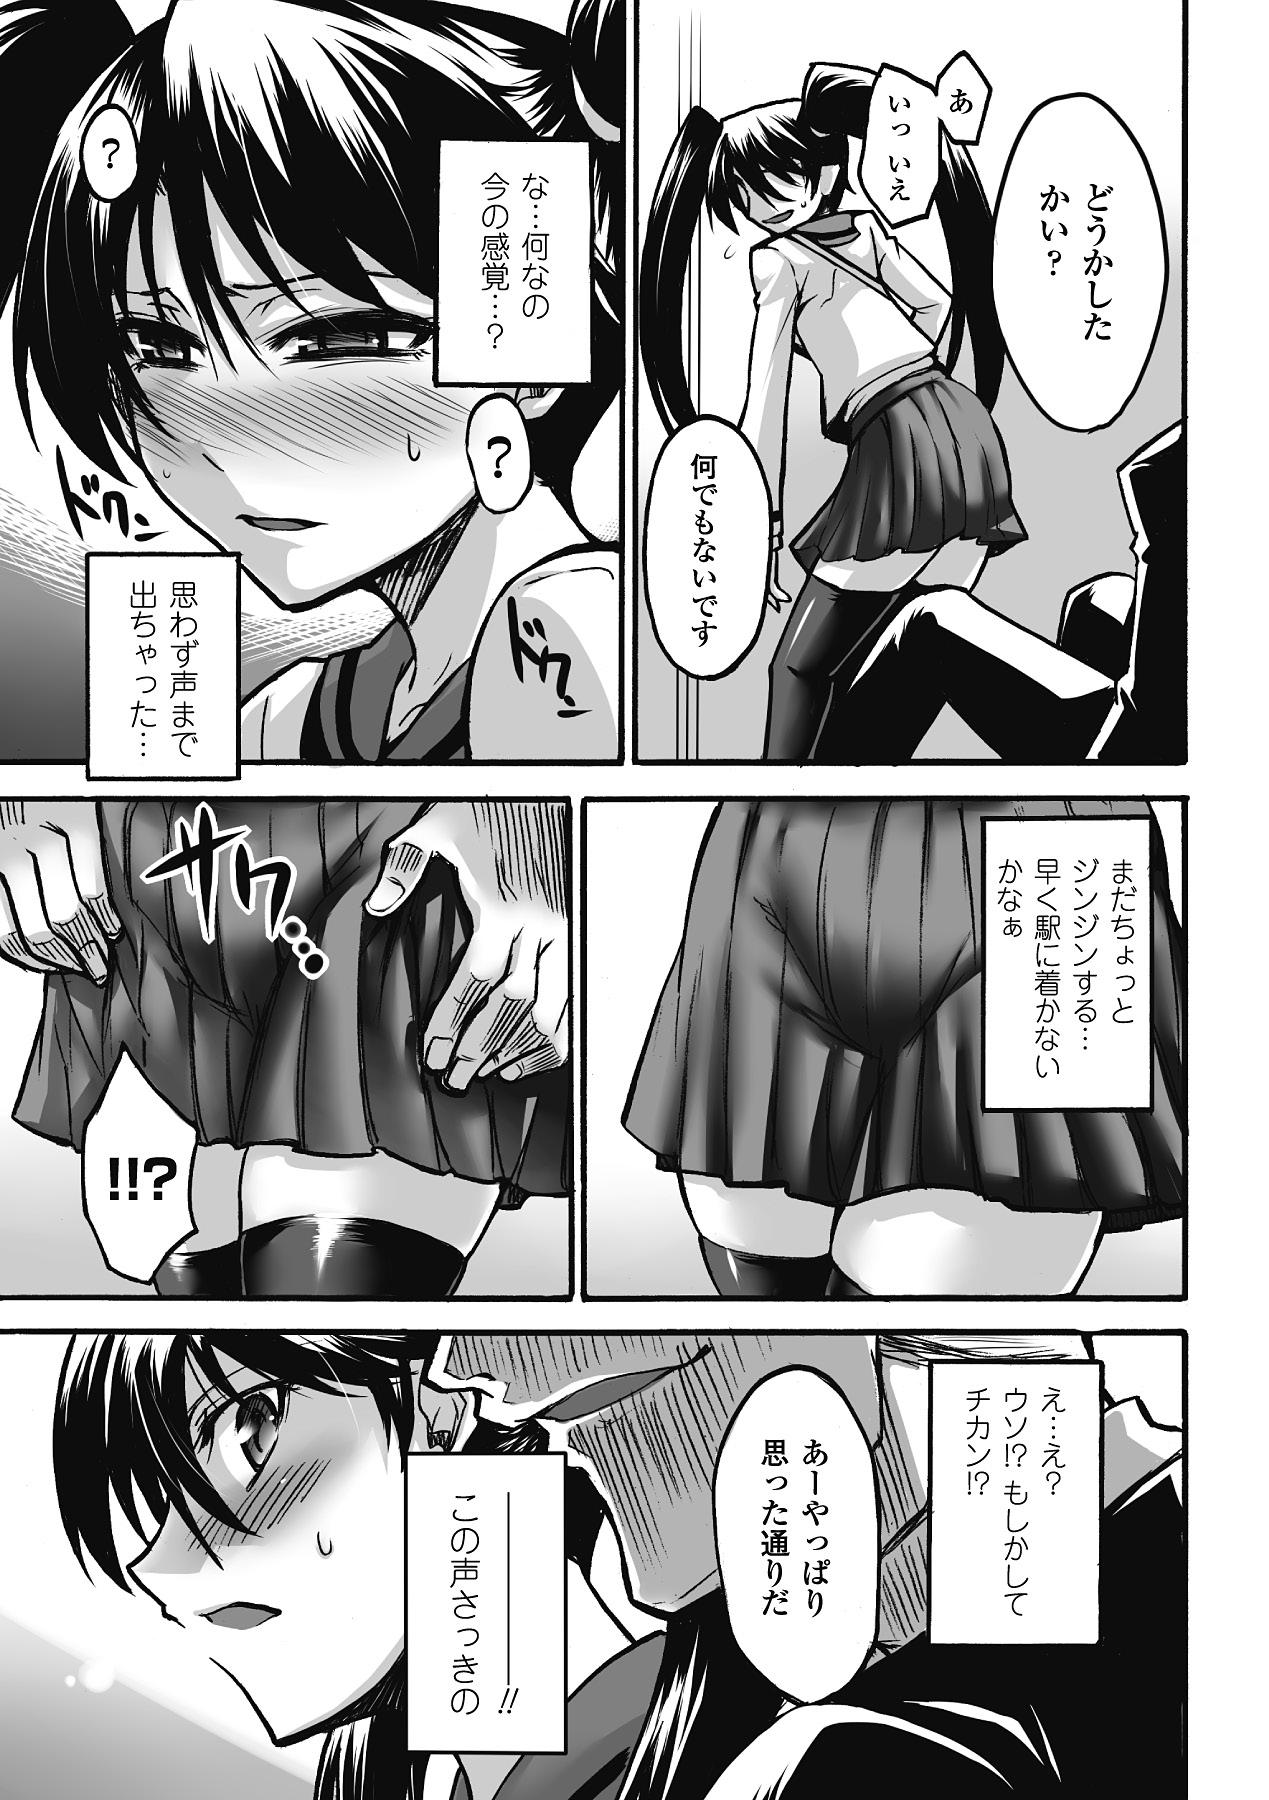 Lovers Chikan Anthology Comics Vol. 1 Scandal - Page 8